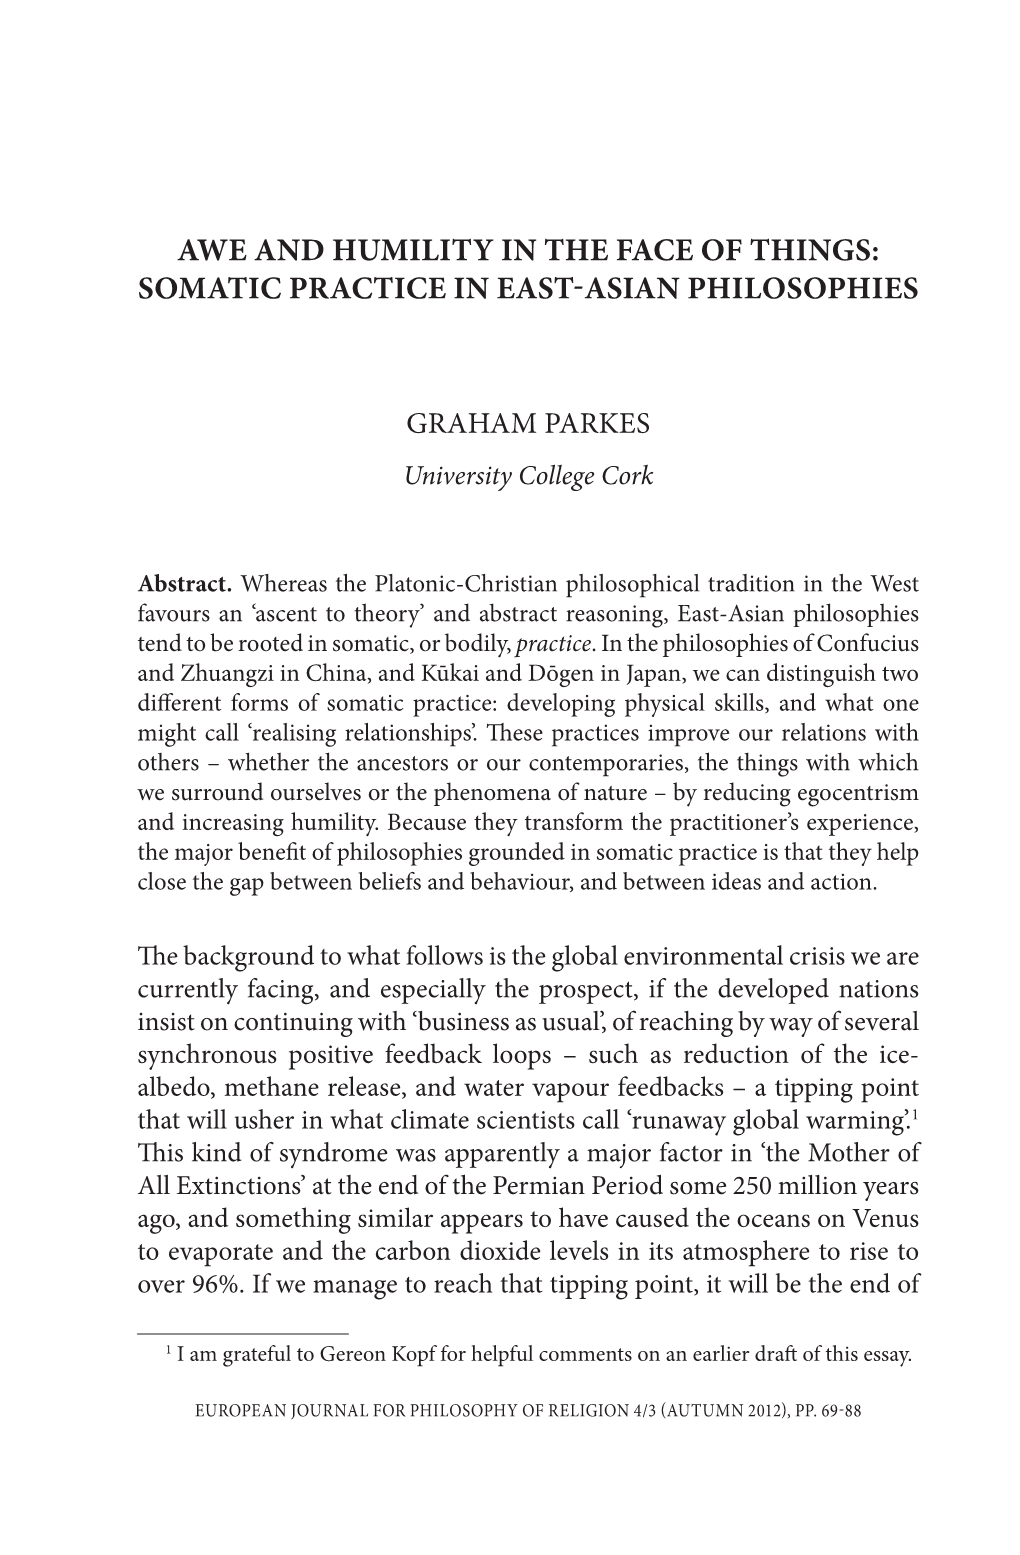 Awe and Humility in the Face of Things: Somatic Practice in East-Asian Philosophies